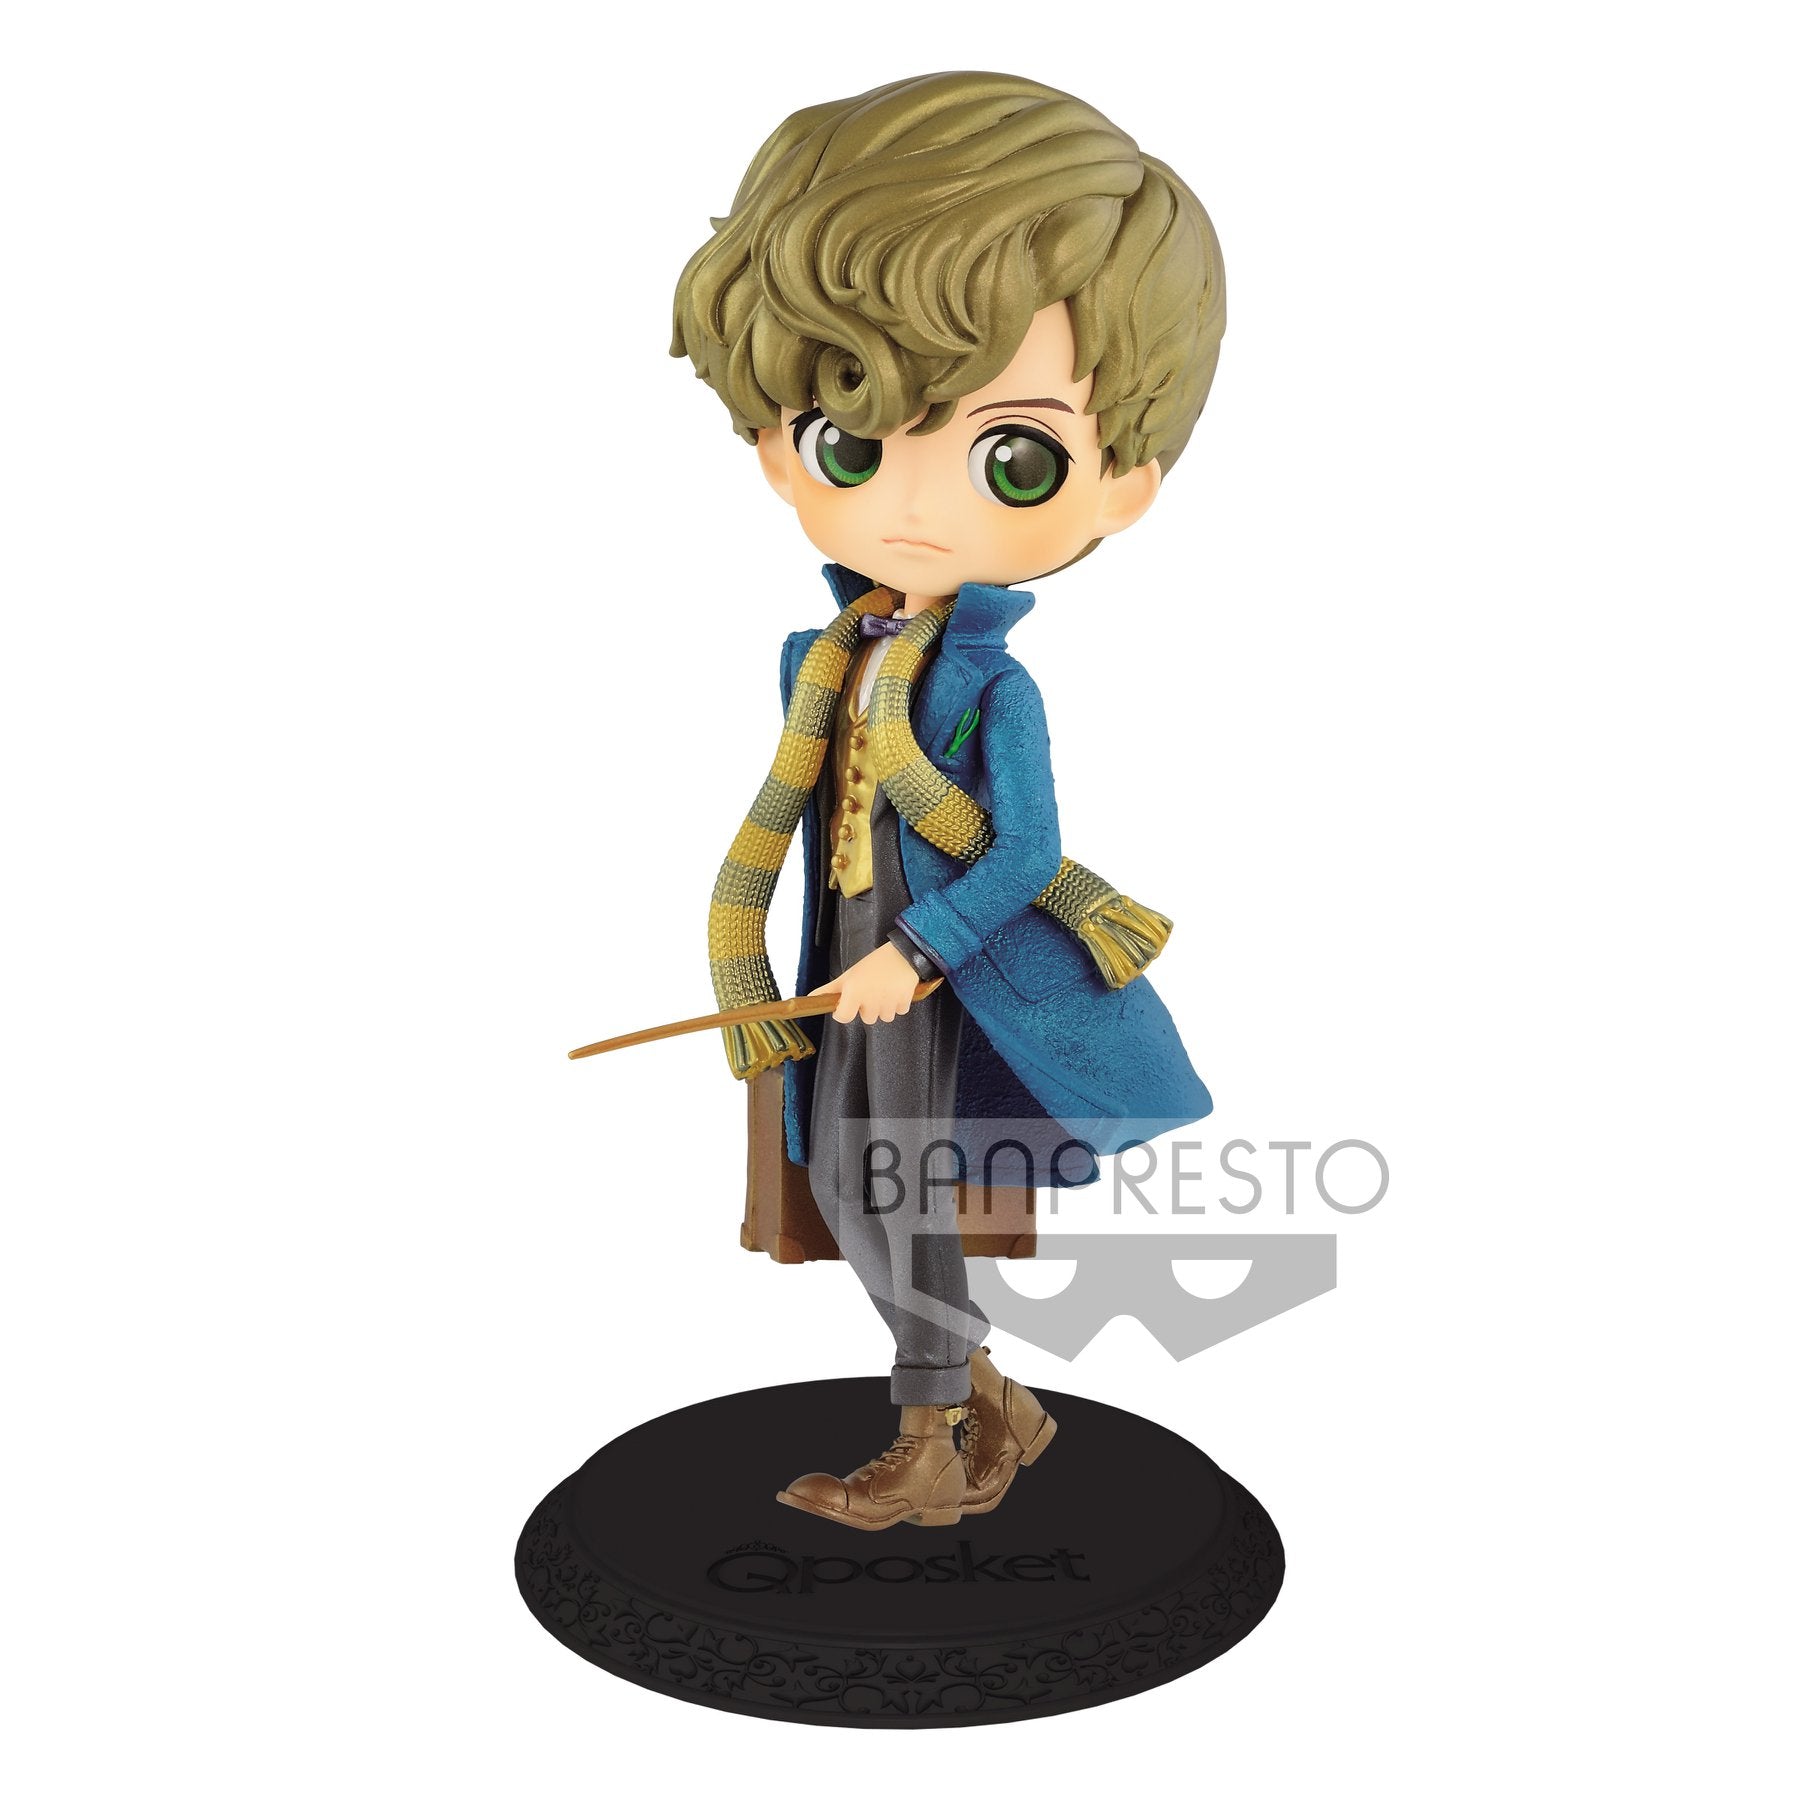 Banpresto - Q Posket - Fantastic Beasts and Where to Find Them - Newt Scamander (Pastel Color) - Marvelous Toys